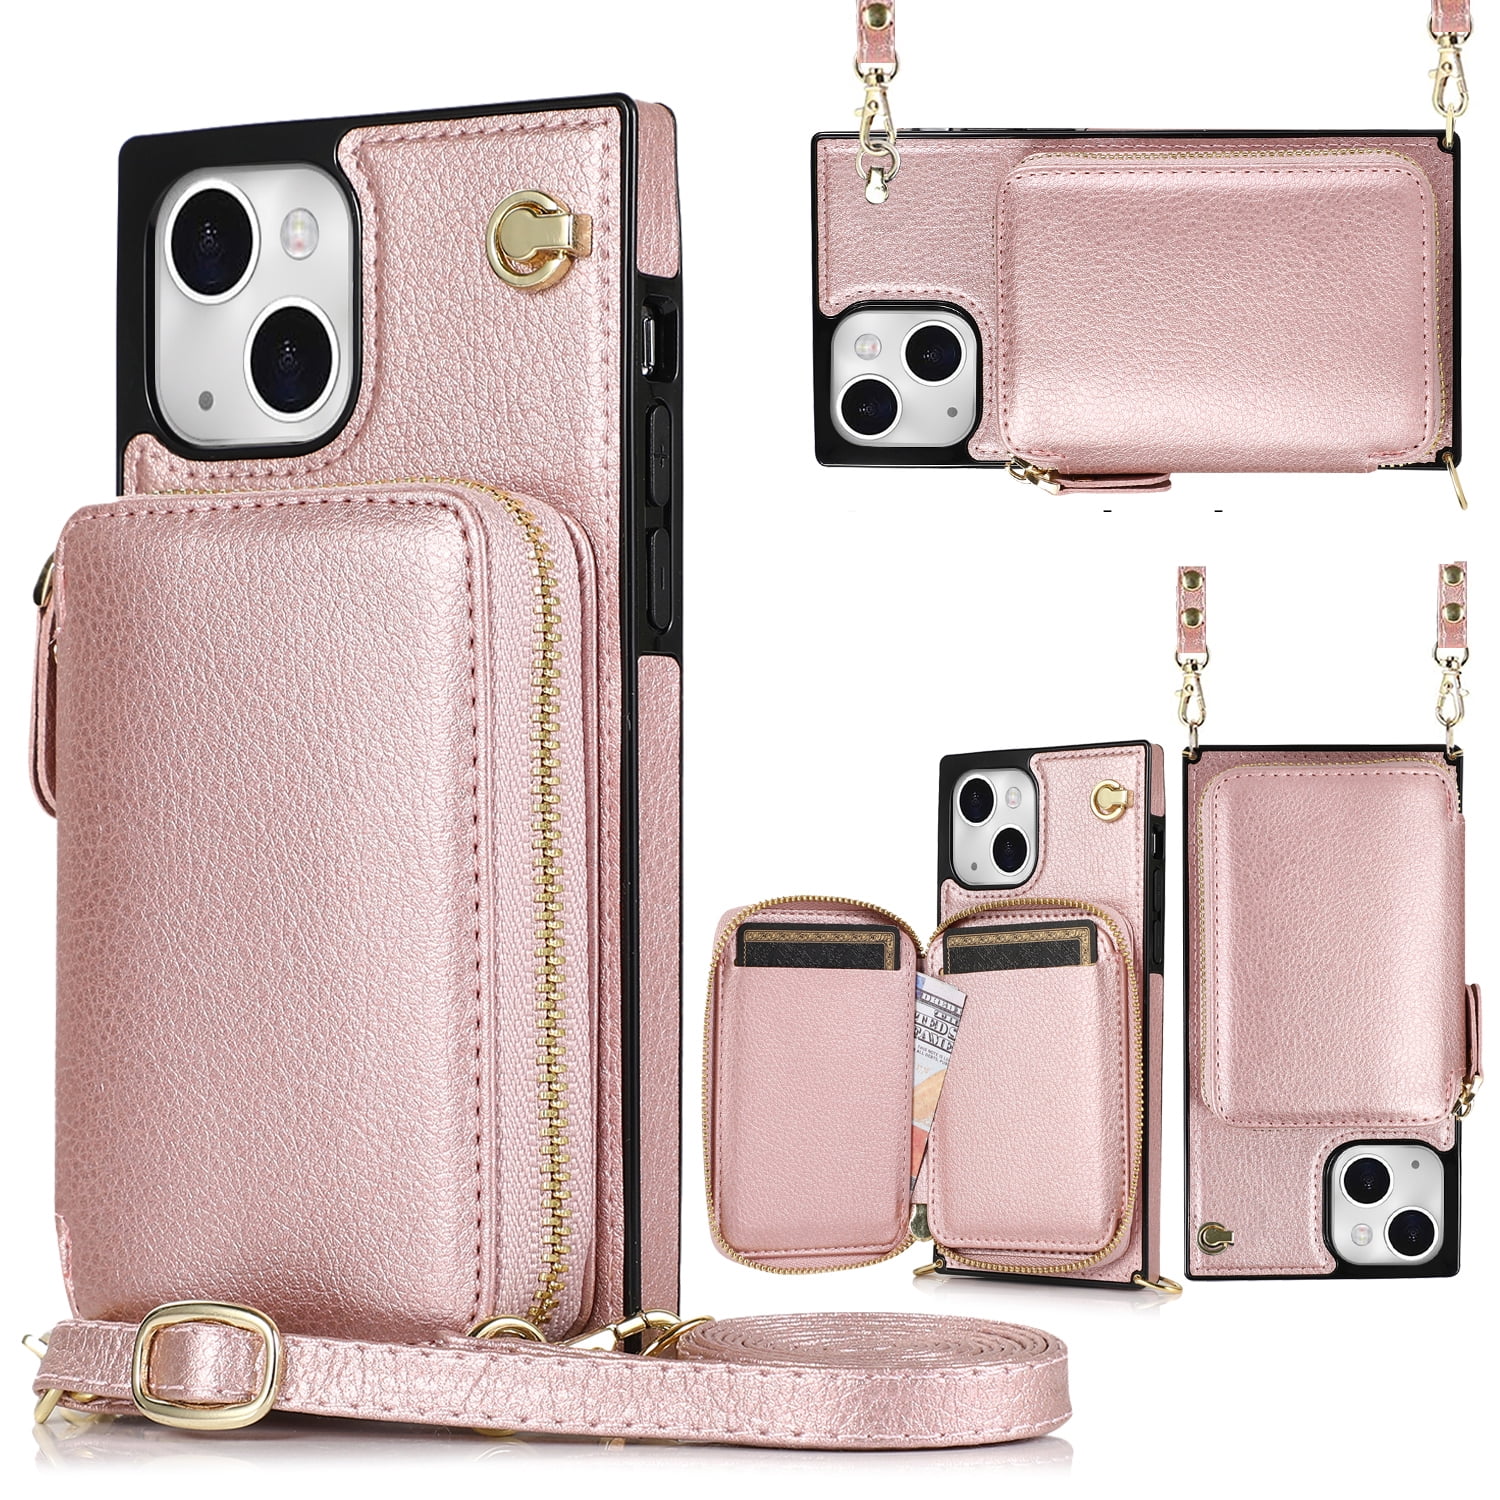 iPhone 13 Pro Max Wallet Case with Crossbody Strap, Dteck Zipper Pocket  Purse Phone Case with RFID Blocking Card Holder Compatible with iPhone 13  Pro Max, Rosegold 